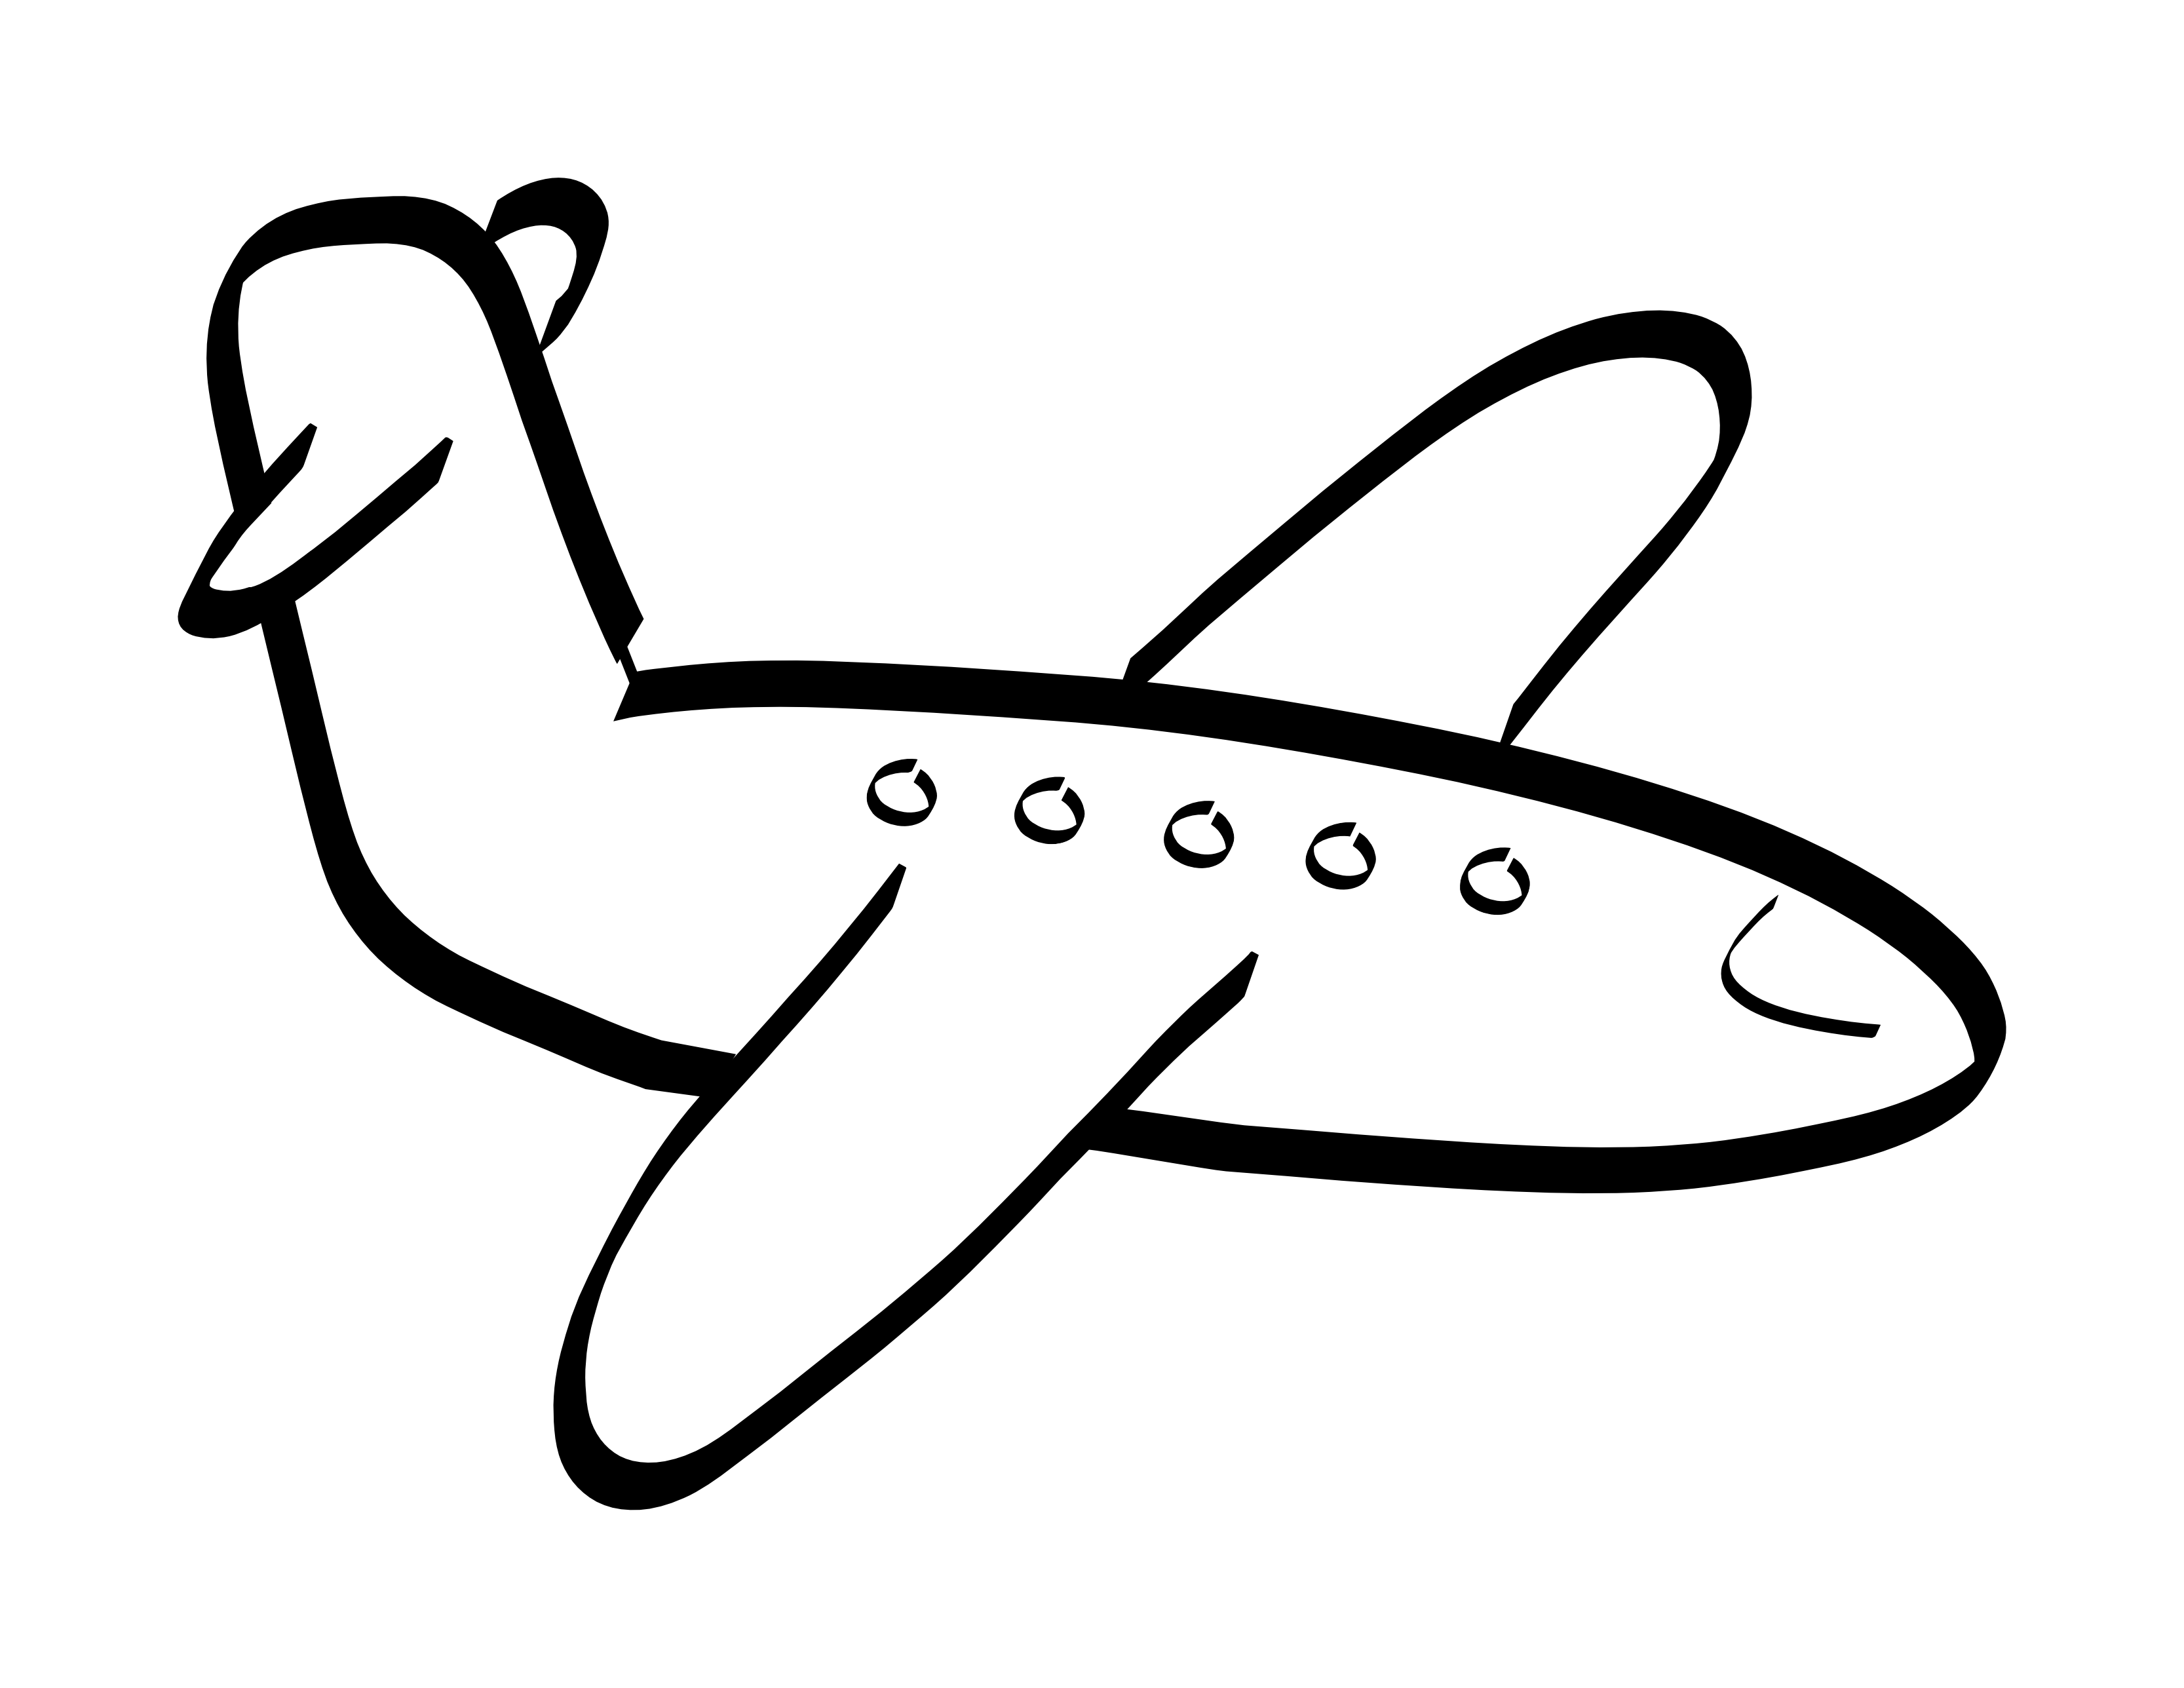 Dory clipart coloring page baby. Simple airplane google search